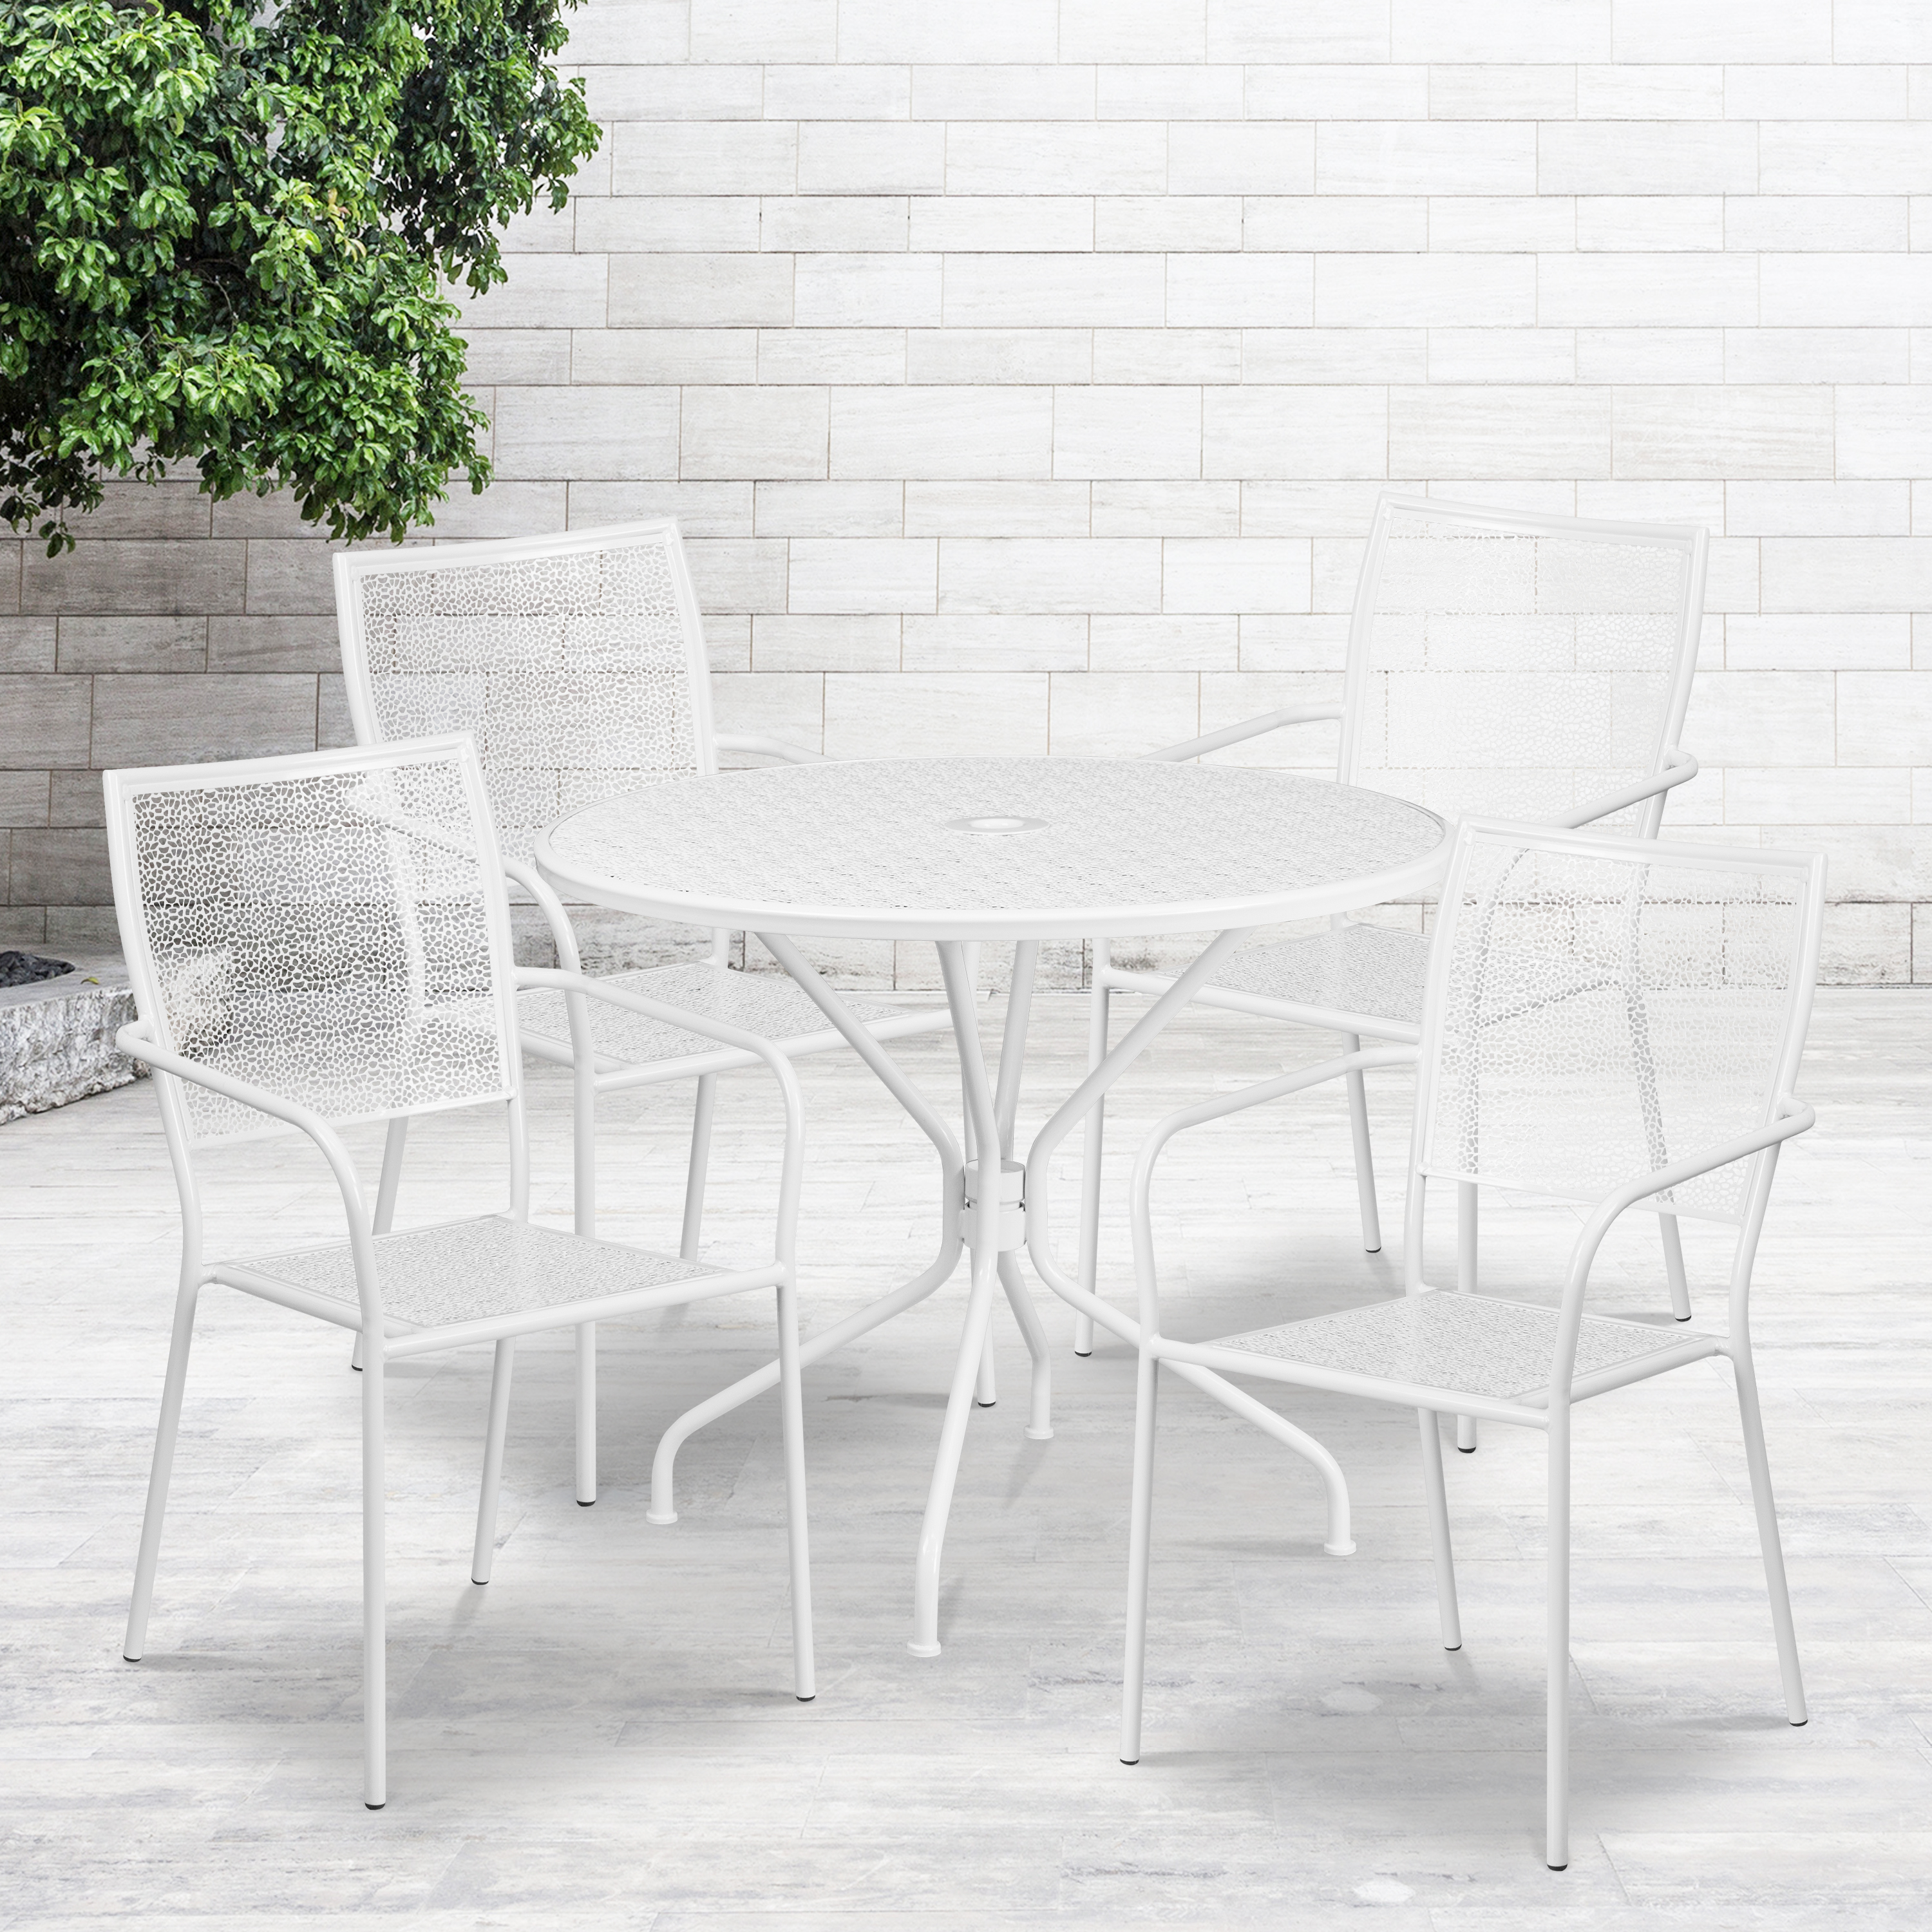 Flash Furniture Oia Commercial Grade 35.25" Round White Indoor-Outdoor Steel Patio Table Set with 4 Square Back Chairs - image 2 of 5